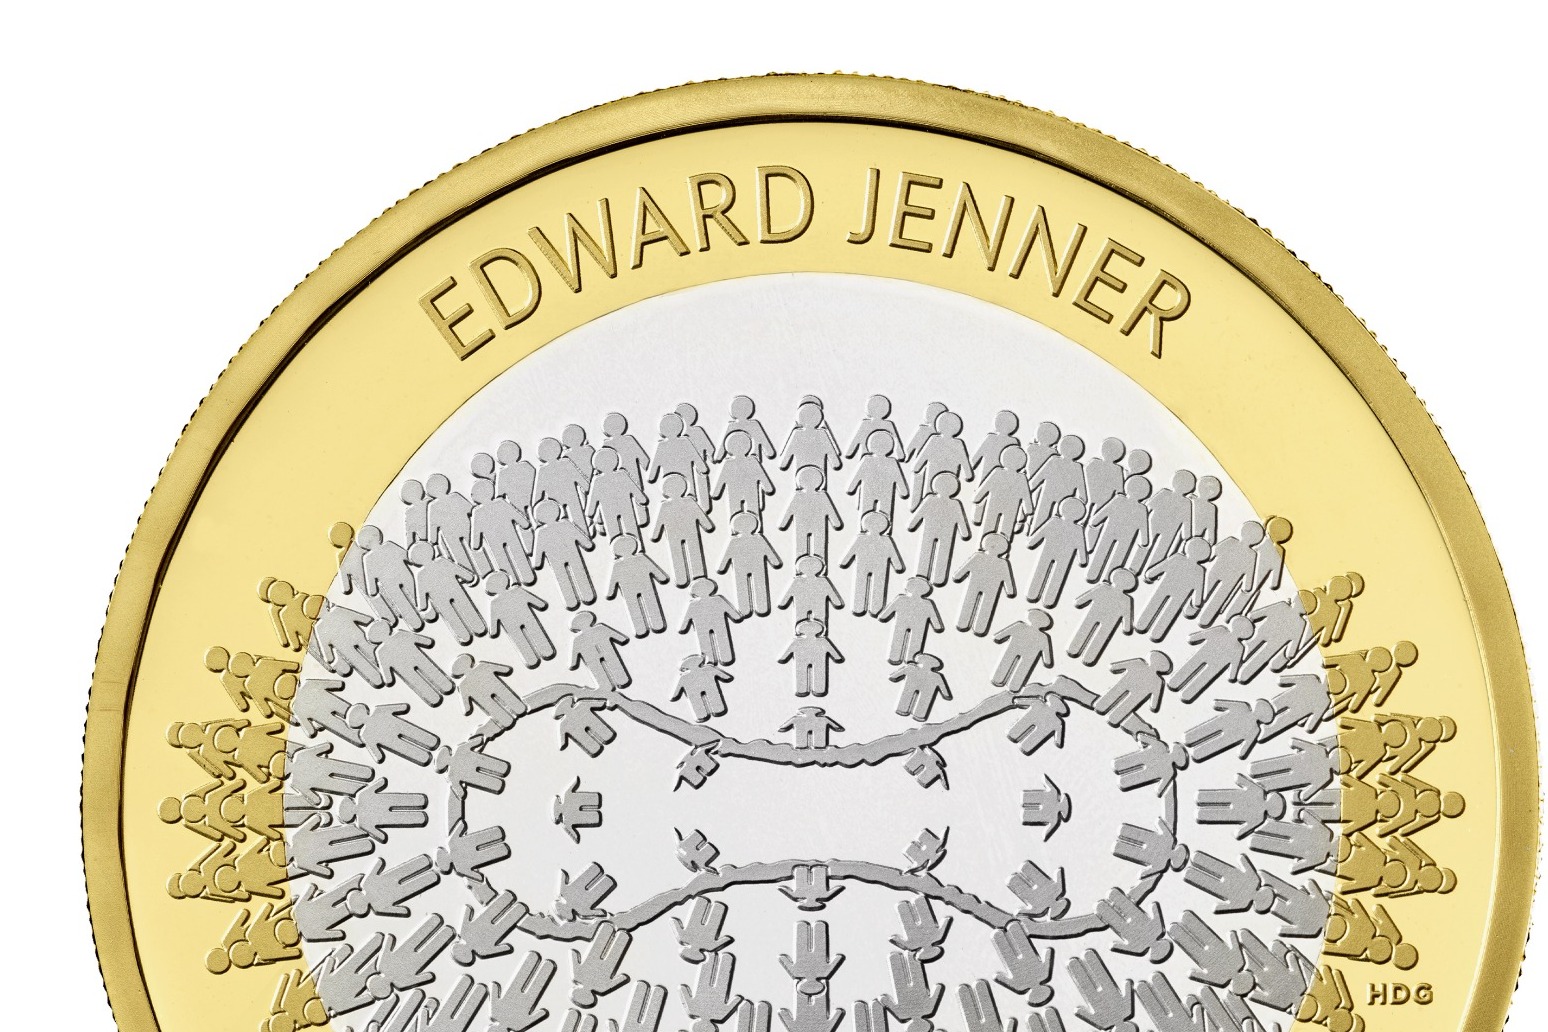 Royal Mint Experience visitors can now strike a £2 coin bearing King’s portrait 